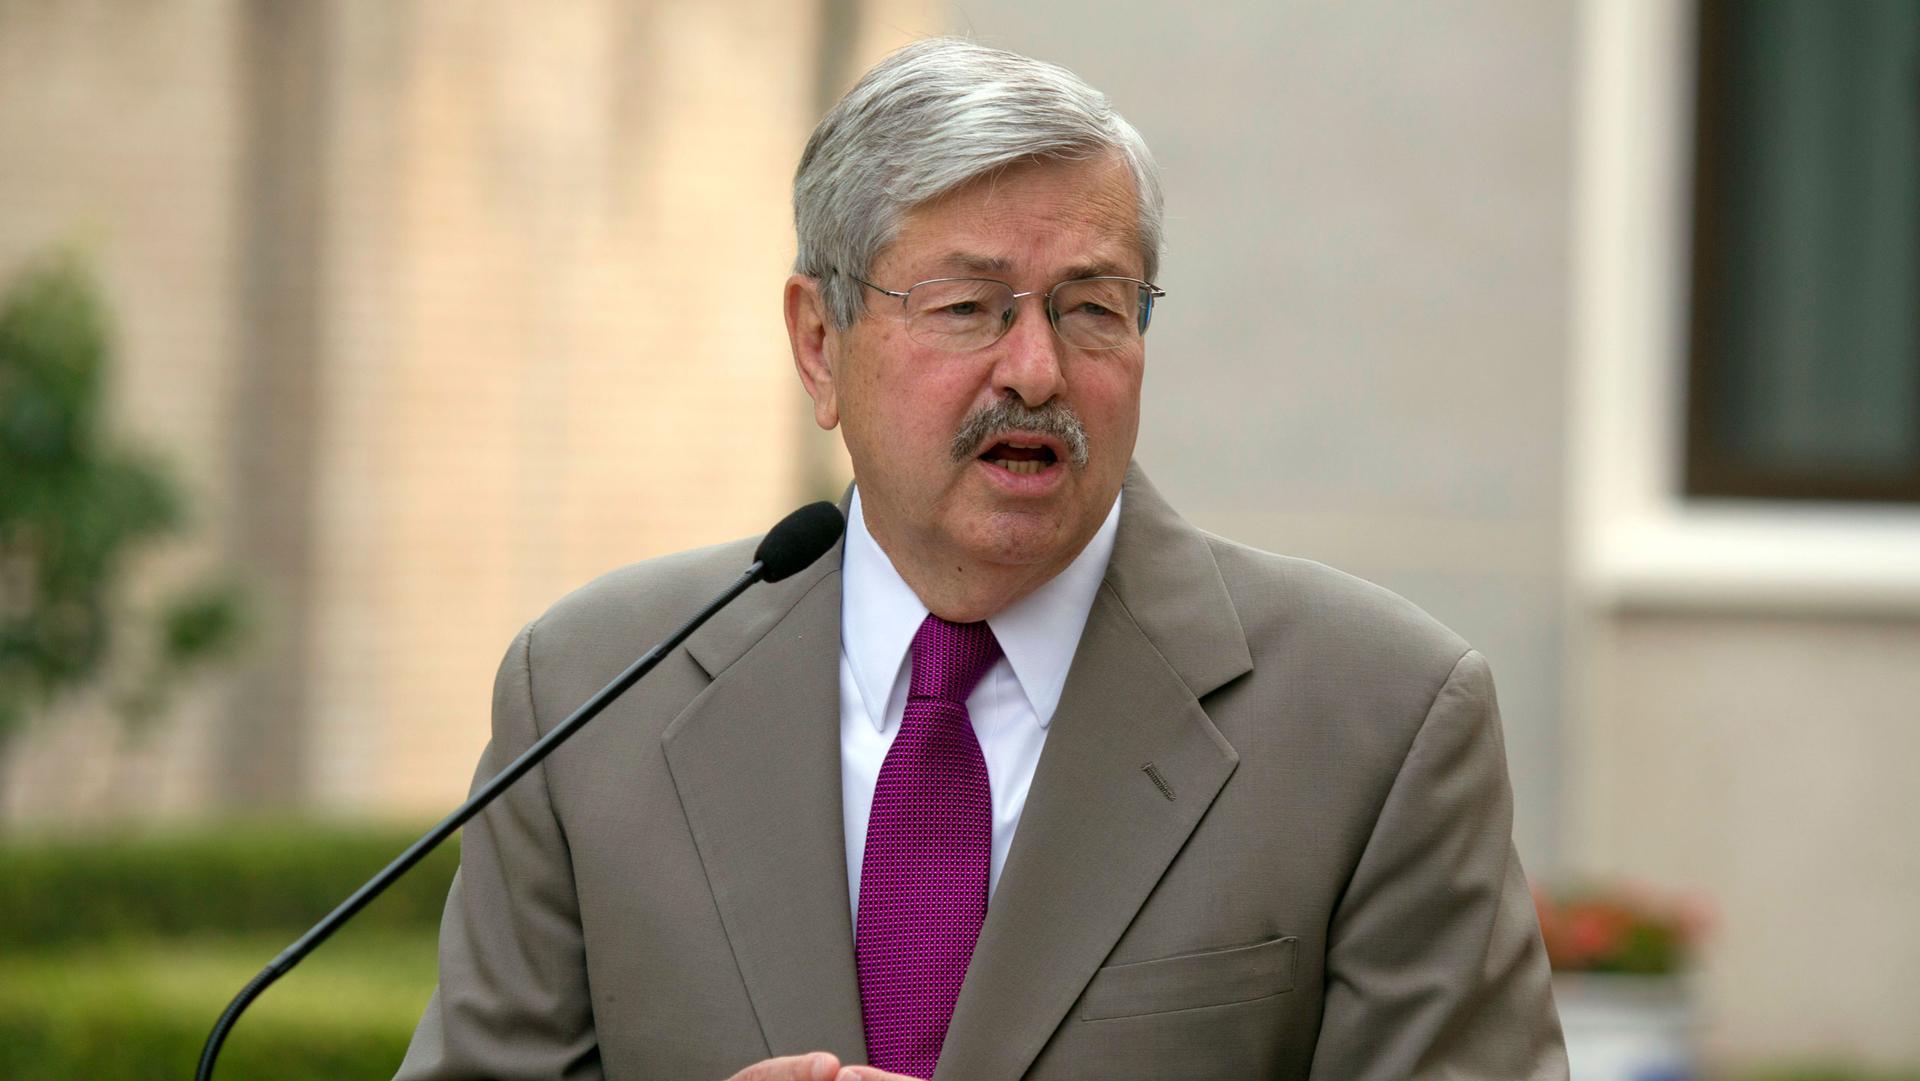 US Ambassador to China Terry Branstad is shown wearing a tan suit and a purple tie while speaking into a small microphone.